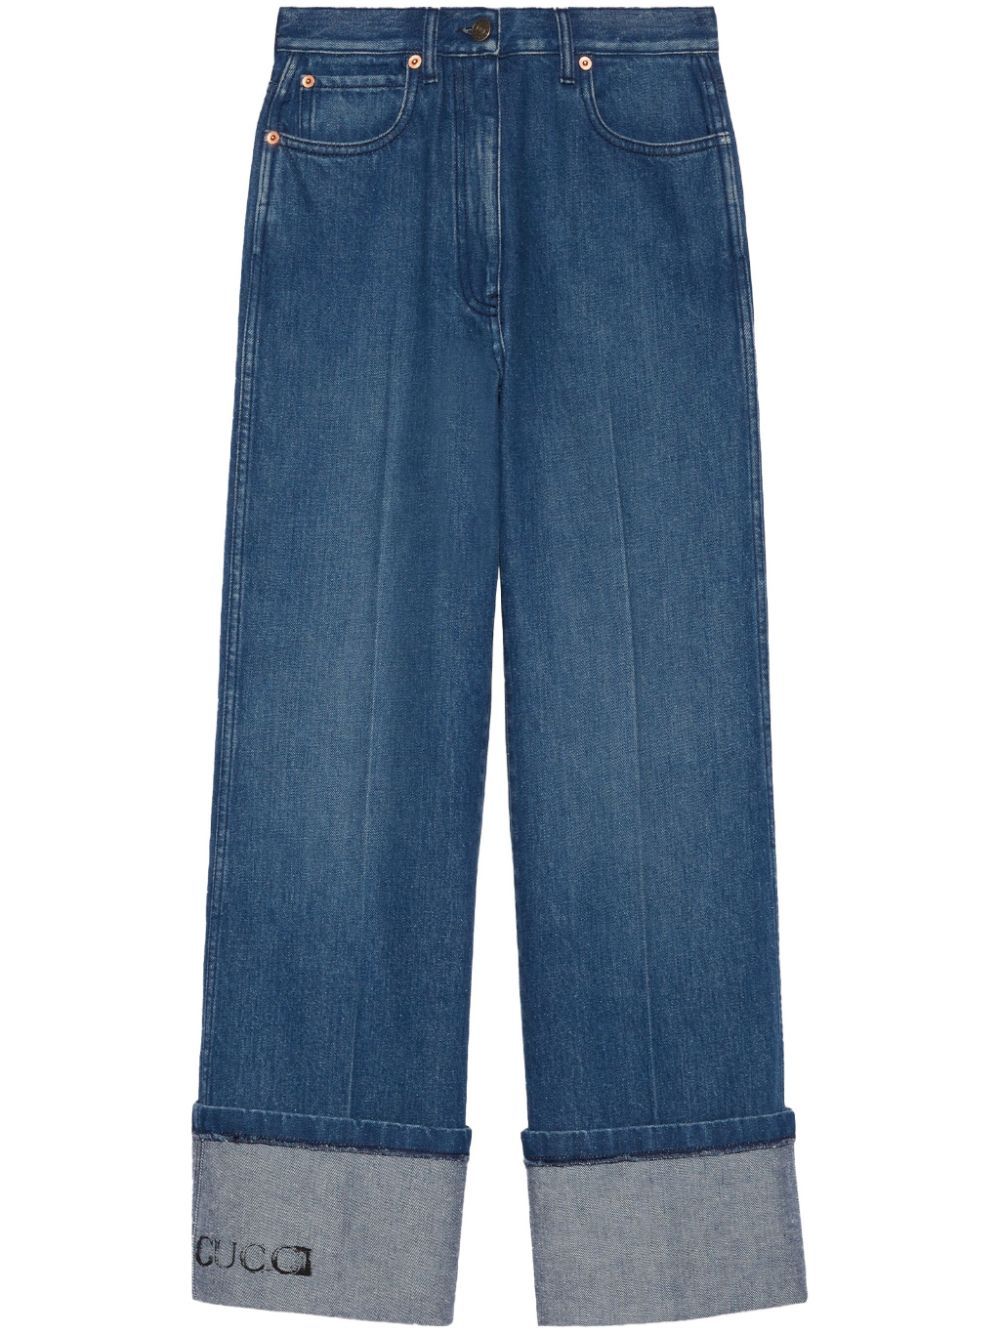 GUCCI Wide-Leg Denim Jeans with Leather Logo Tag and Roll-Up Ankle Cuffs for Women - FW23